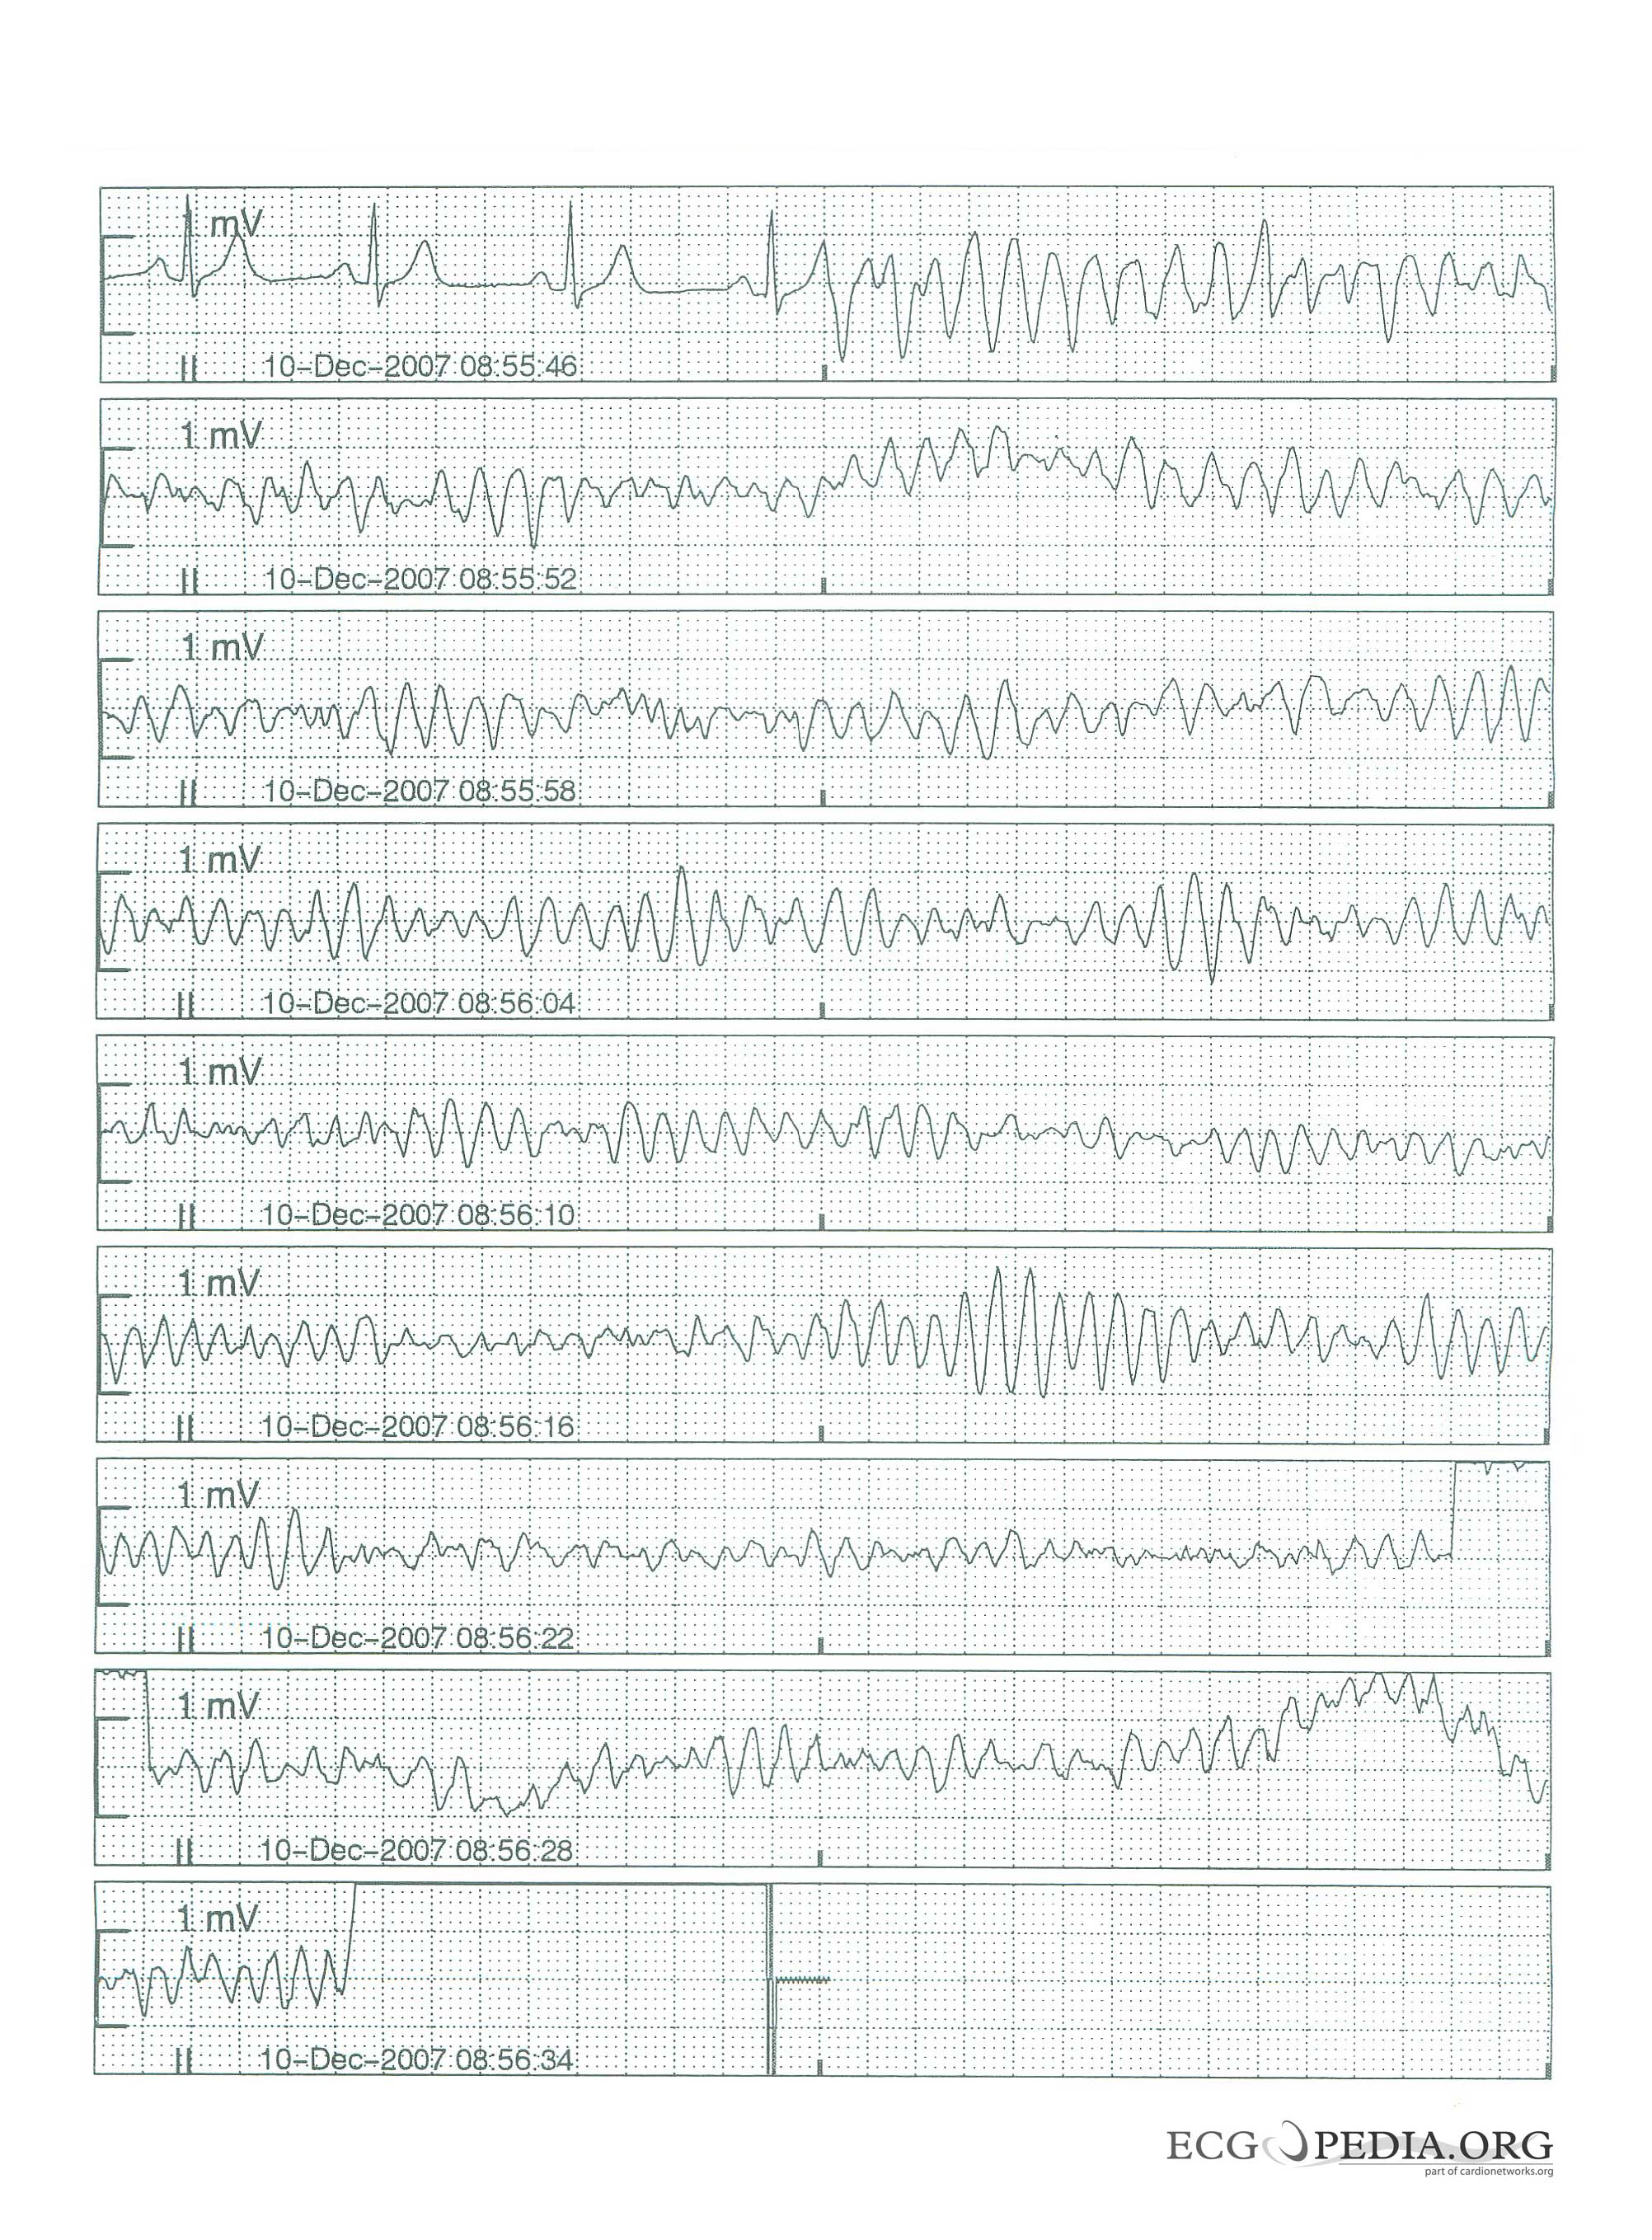 Arrhythmias in a patient with short coupled torsades de pointes degenerating in ventricular fibrillation[5]